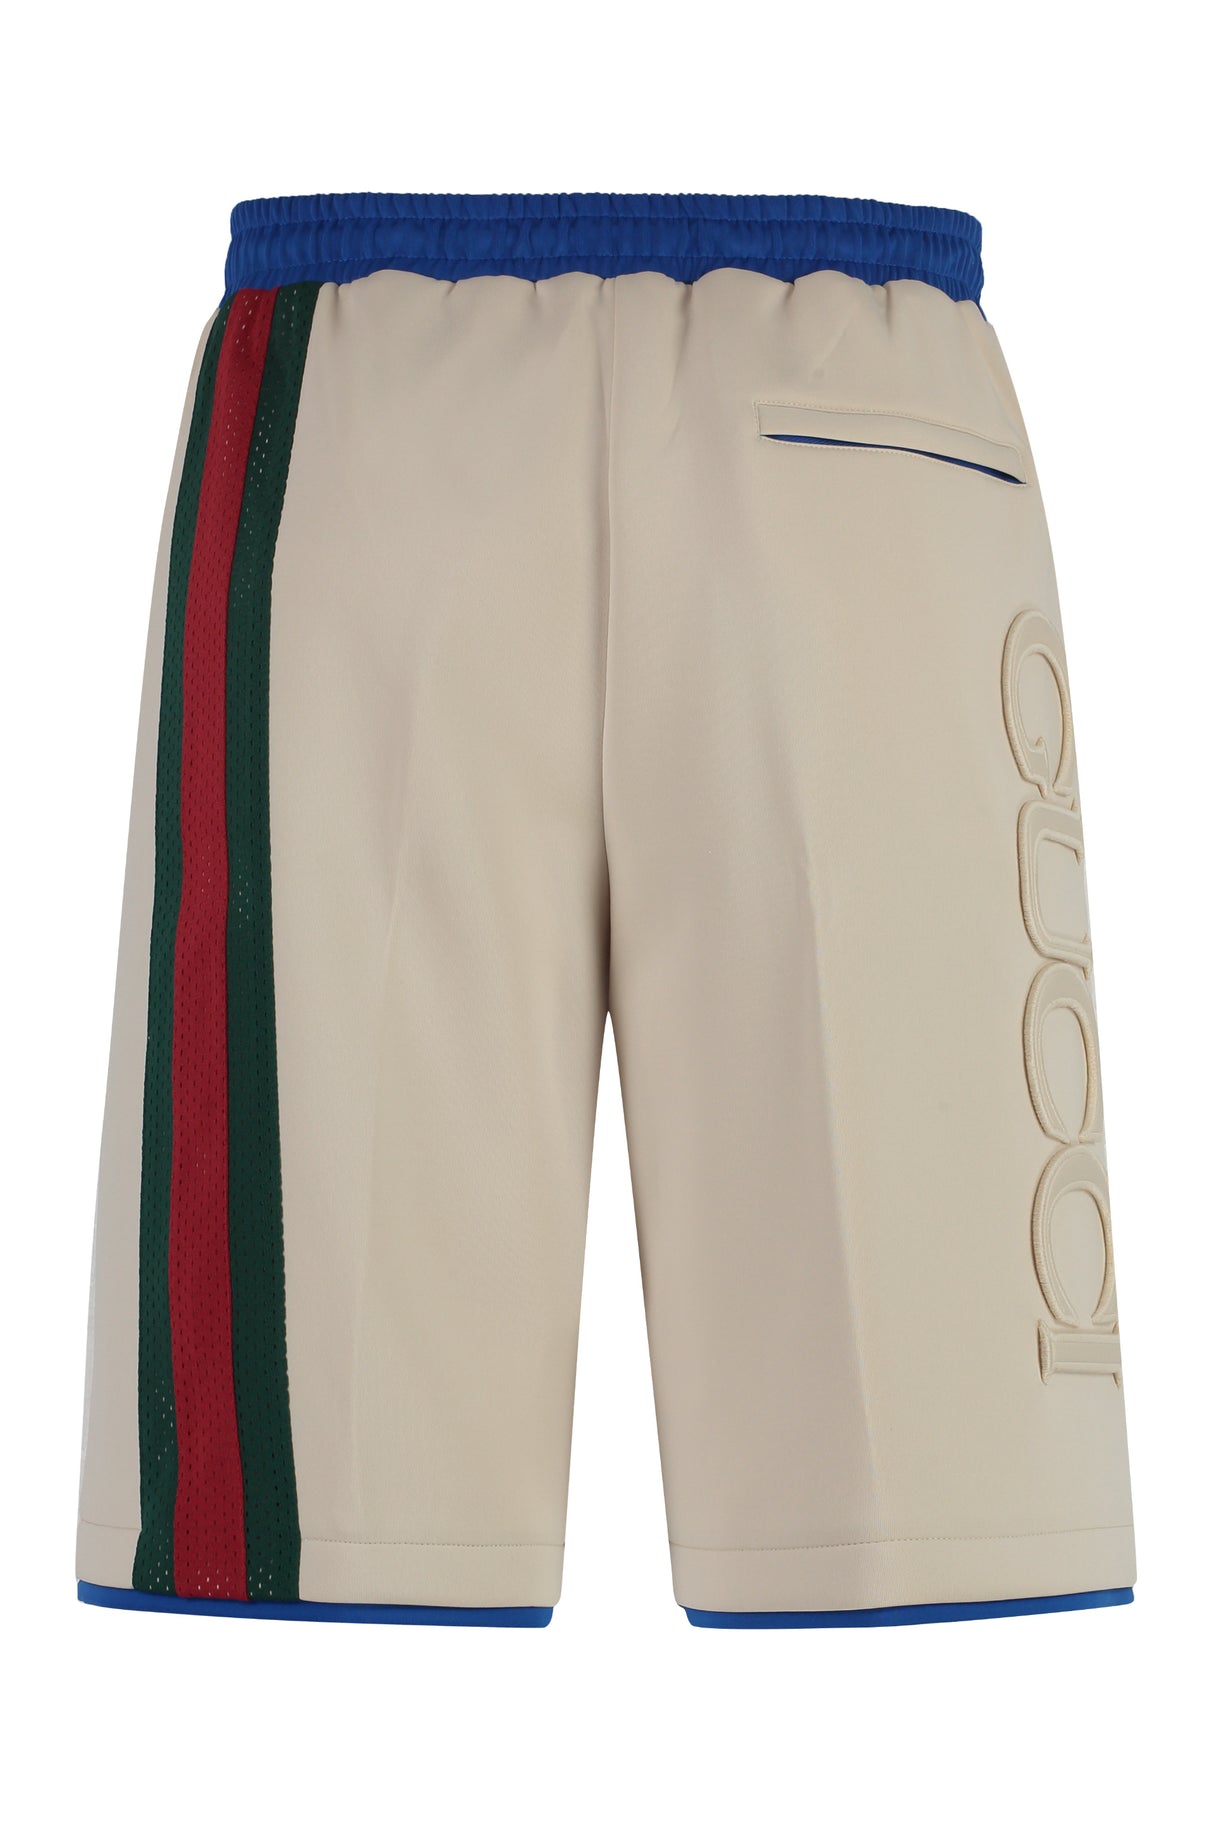 GUCCI Men's Techno Fabric Bermuda Shorts with Side and Back Zip Pockets